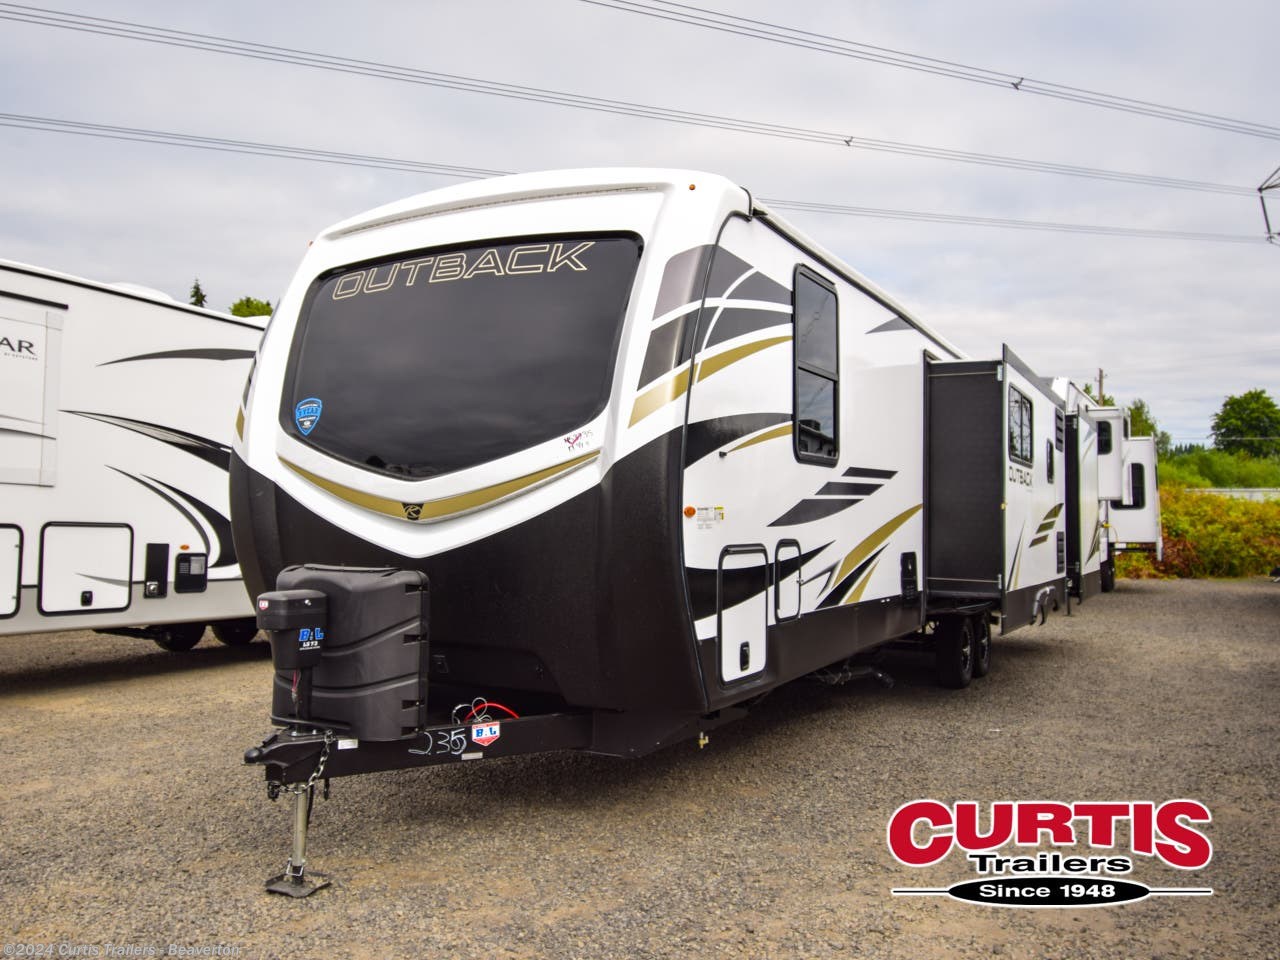 outback travel trailer 340bh